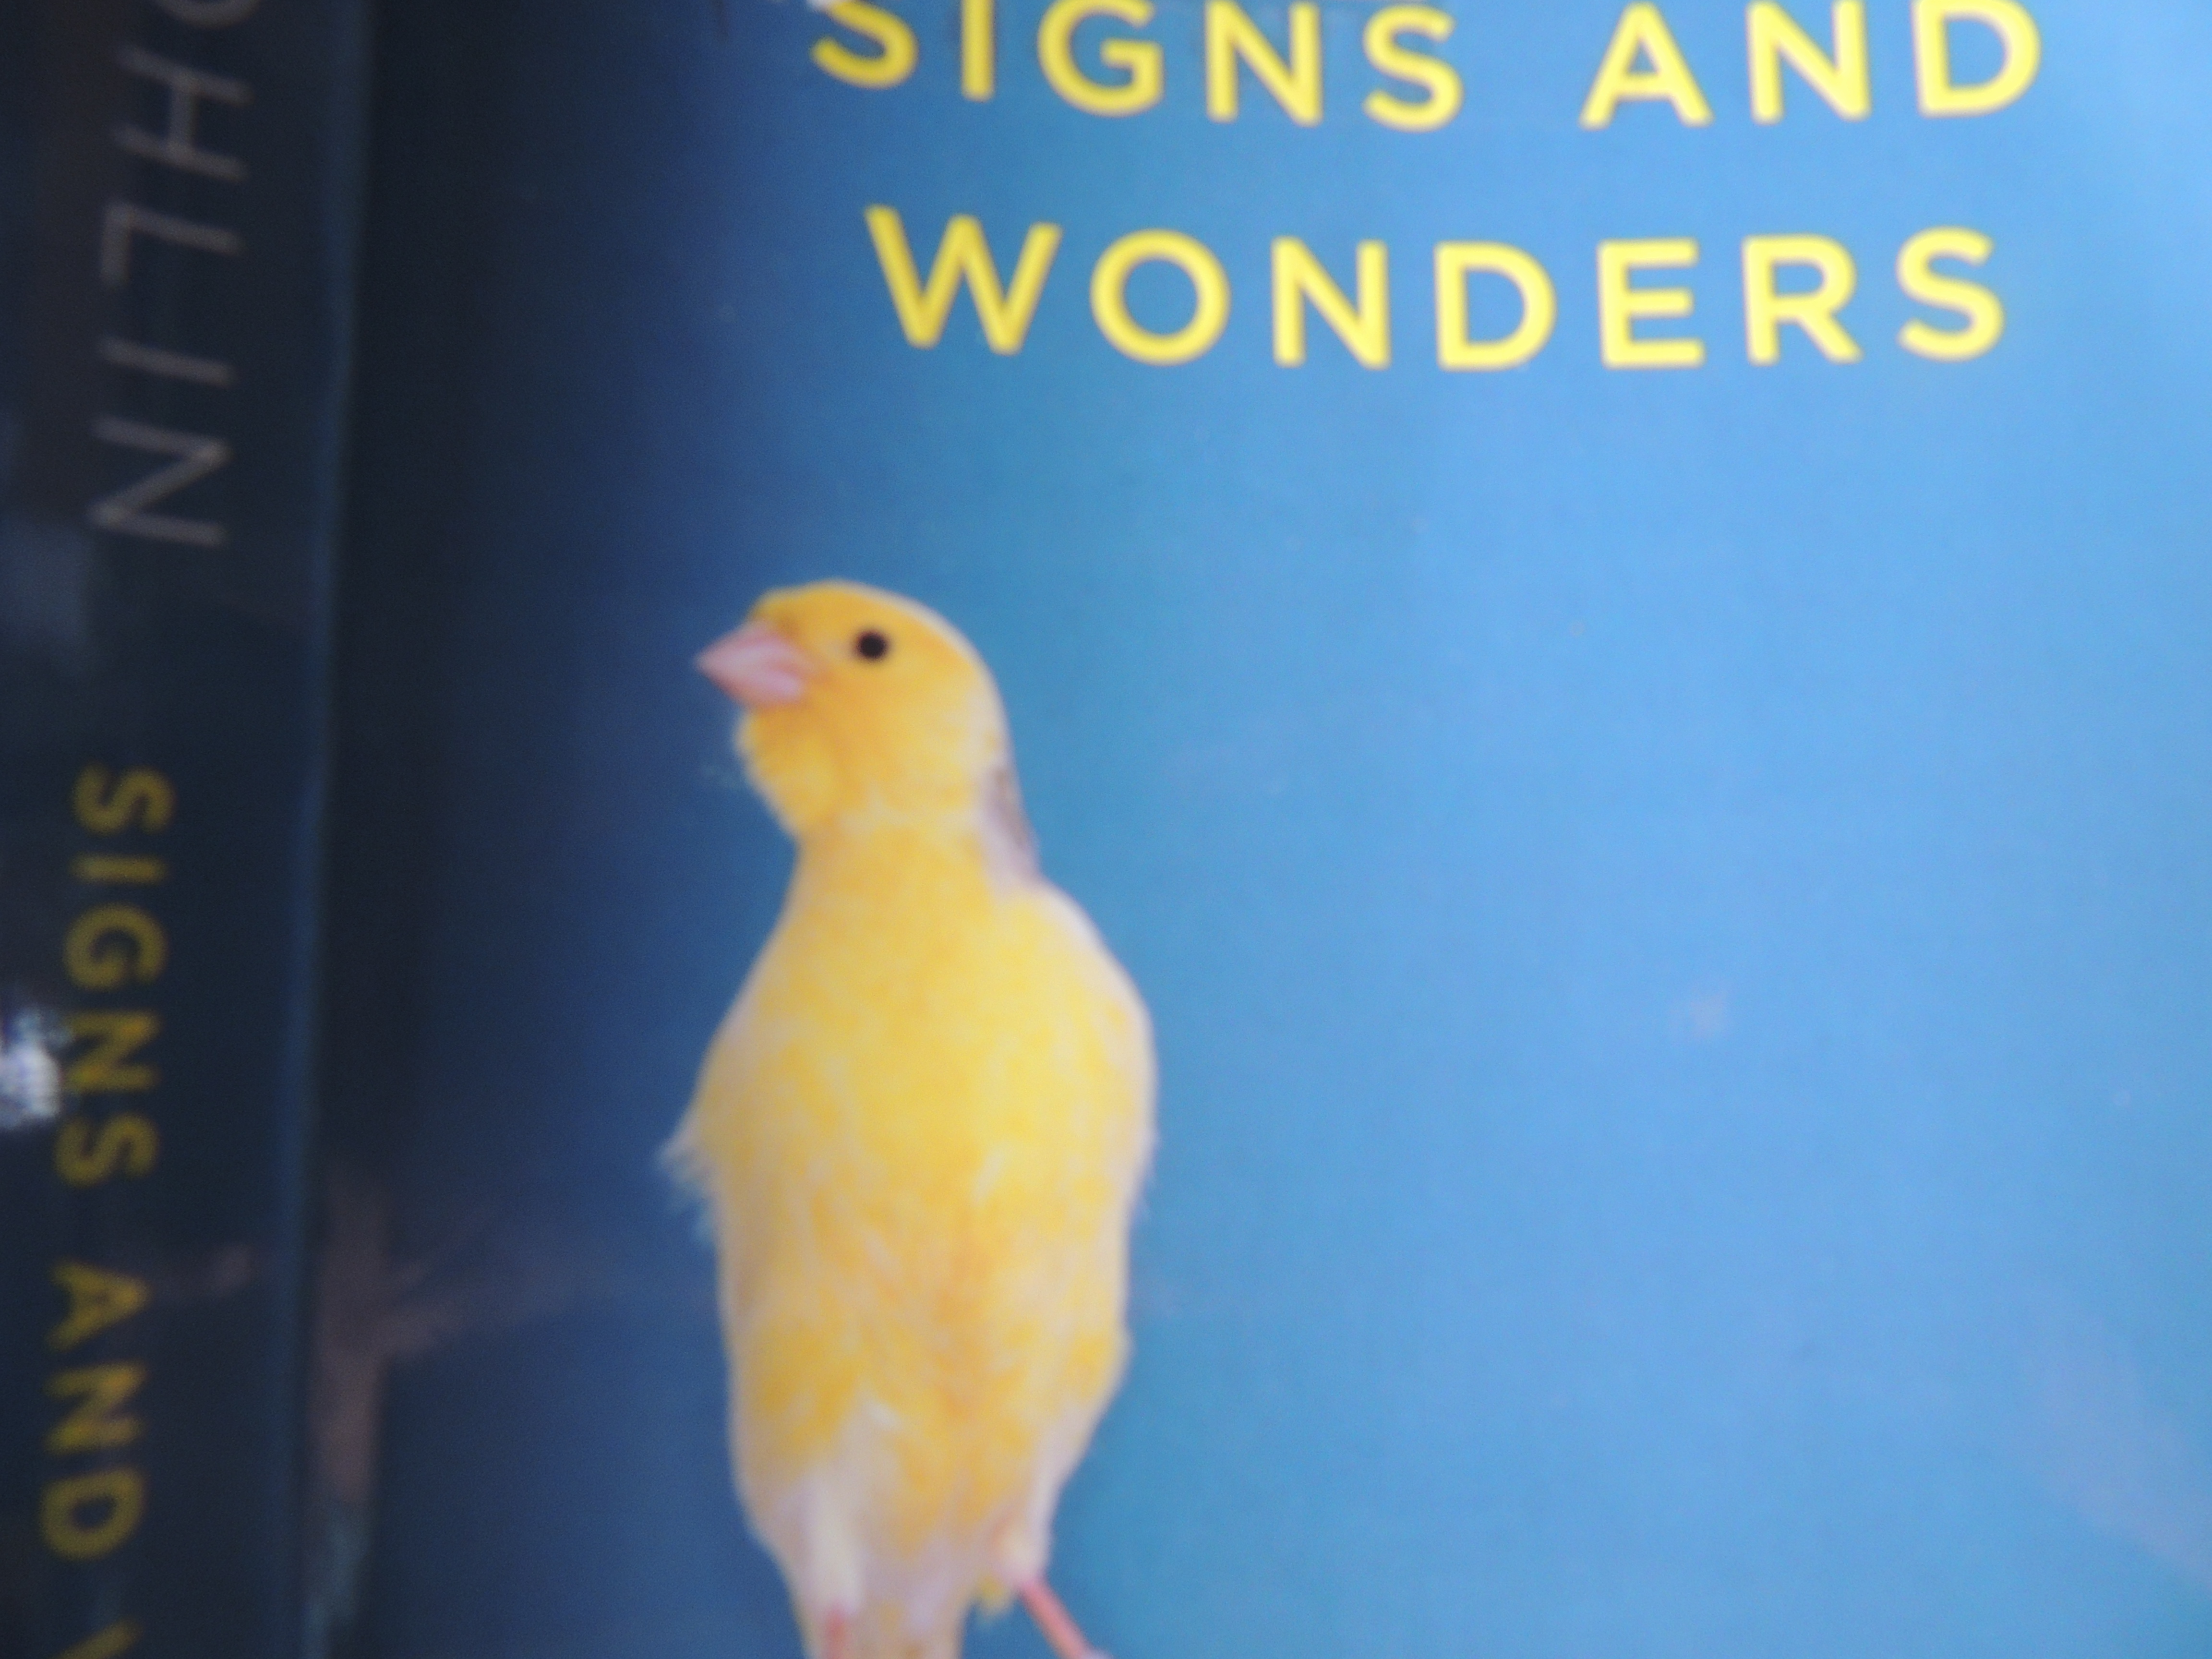 Review of Alix Ohlin’s Signs and Wonders